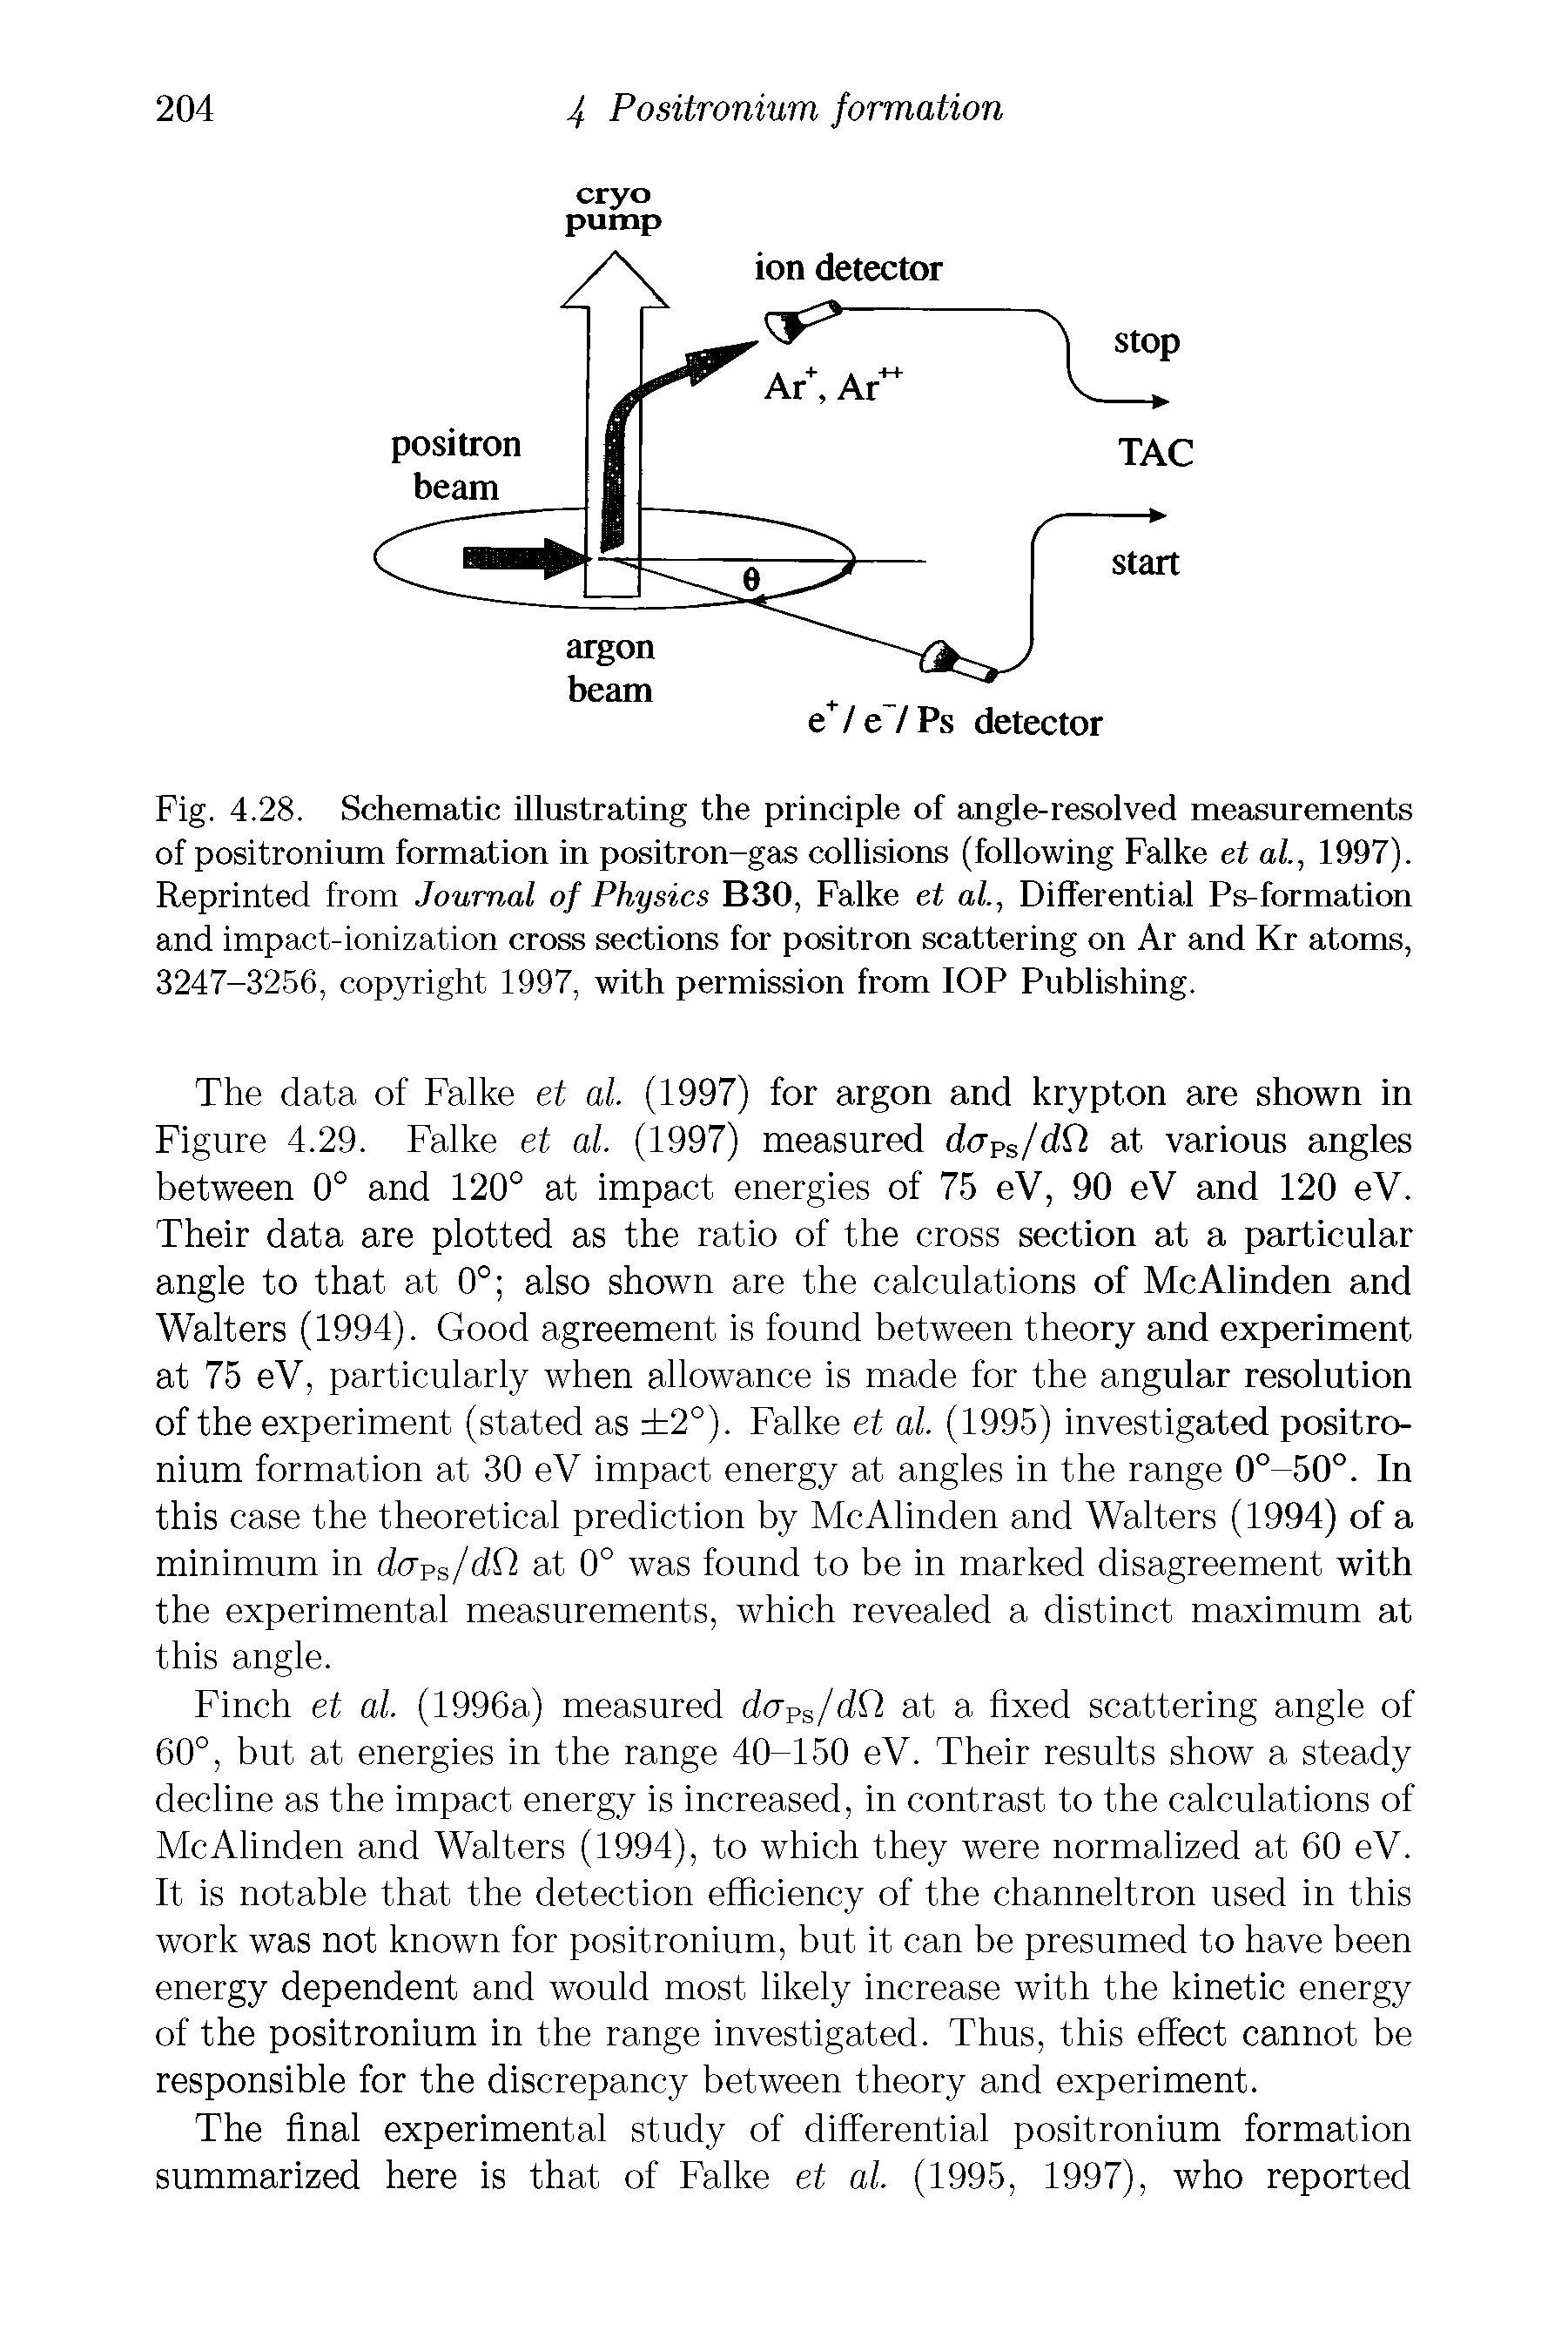 Fig. 4.28. Schematic illustrating the principle of angle-resolved measurements of positronium formation in positron-gas collisions (following Falke et at, 1997). Reprinted from Journal of Physics B30, Falke et al, Differential Ps-formation and impact-ionization cross sections for positron scattering on Ar and Kr atoms, 3247-3256, copyright 1997, with permission from IOP Publishing.